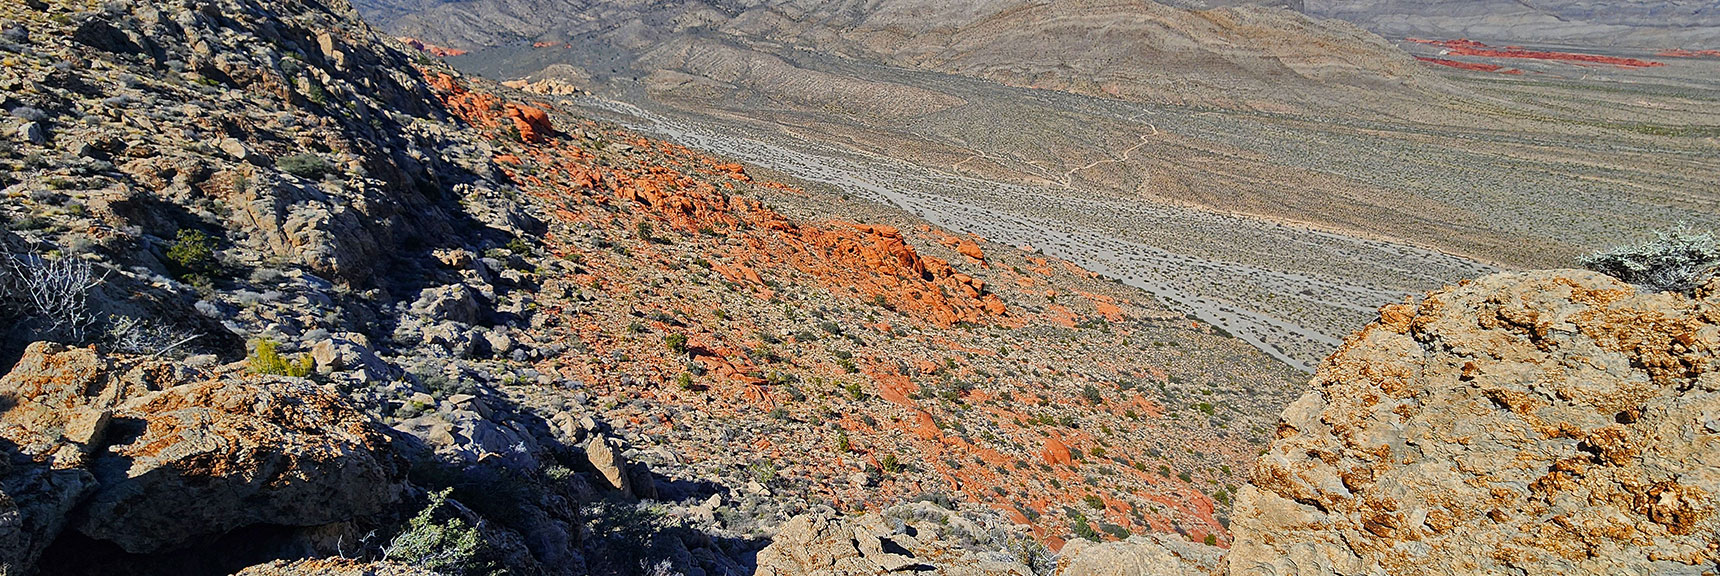 Larger View of Brownstone Basin Descent Slope. | Gray Cap Ridge / Brownstone Basin Loop | La Madre Mountains Wilderness, Nevada